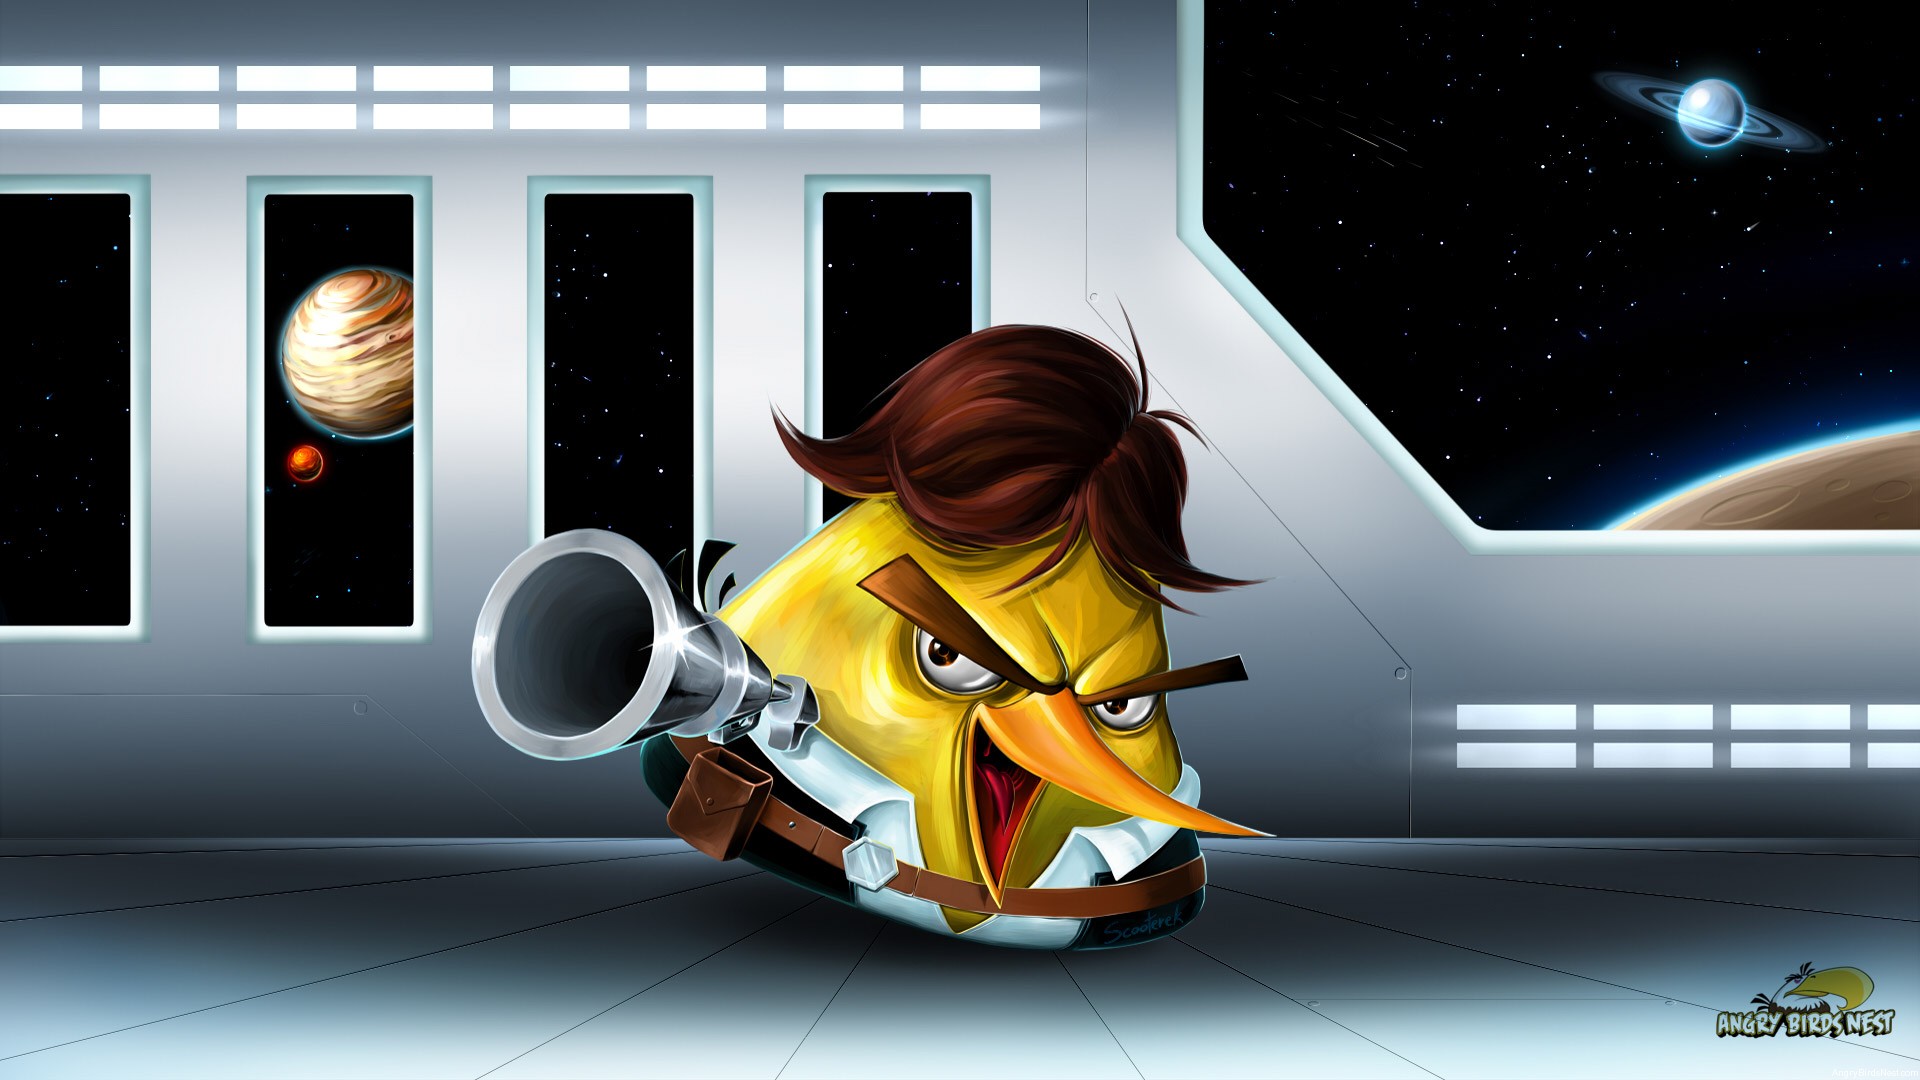 angry birds star wars han solo